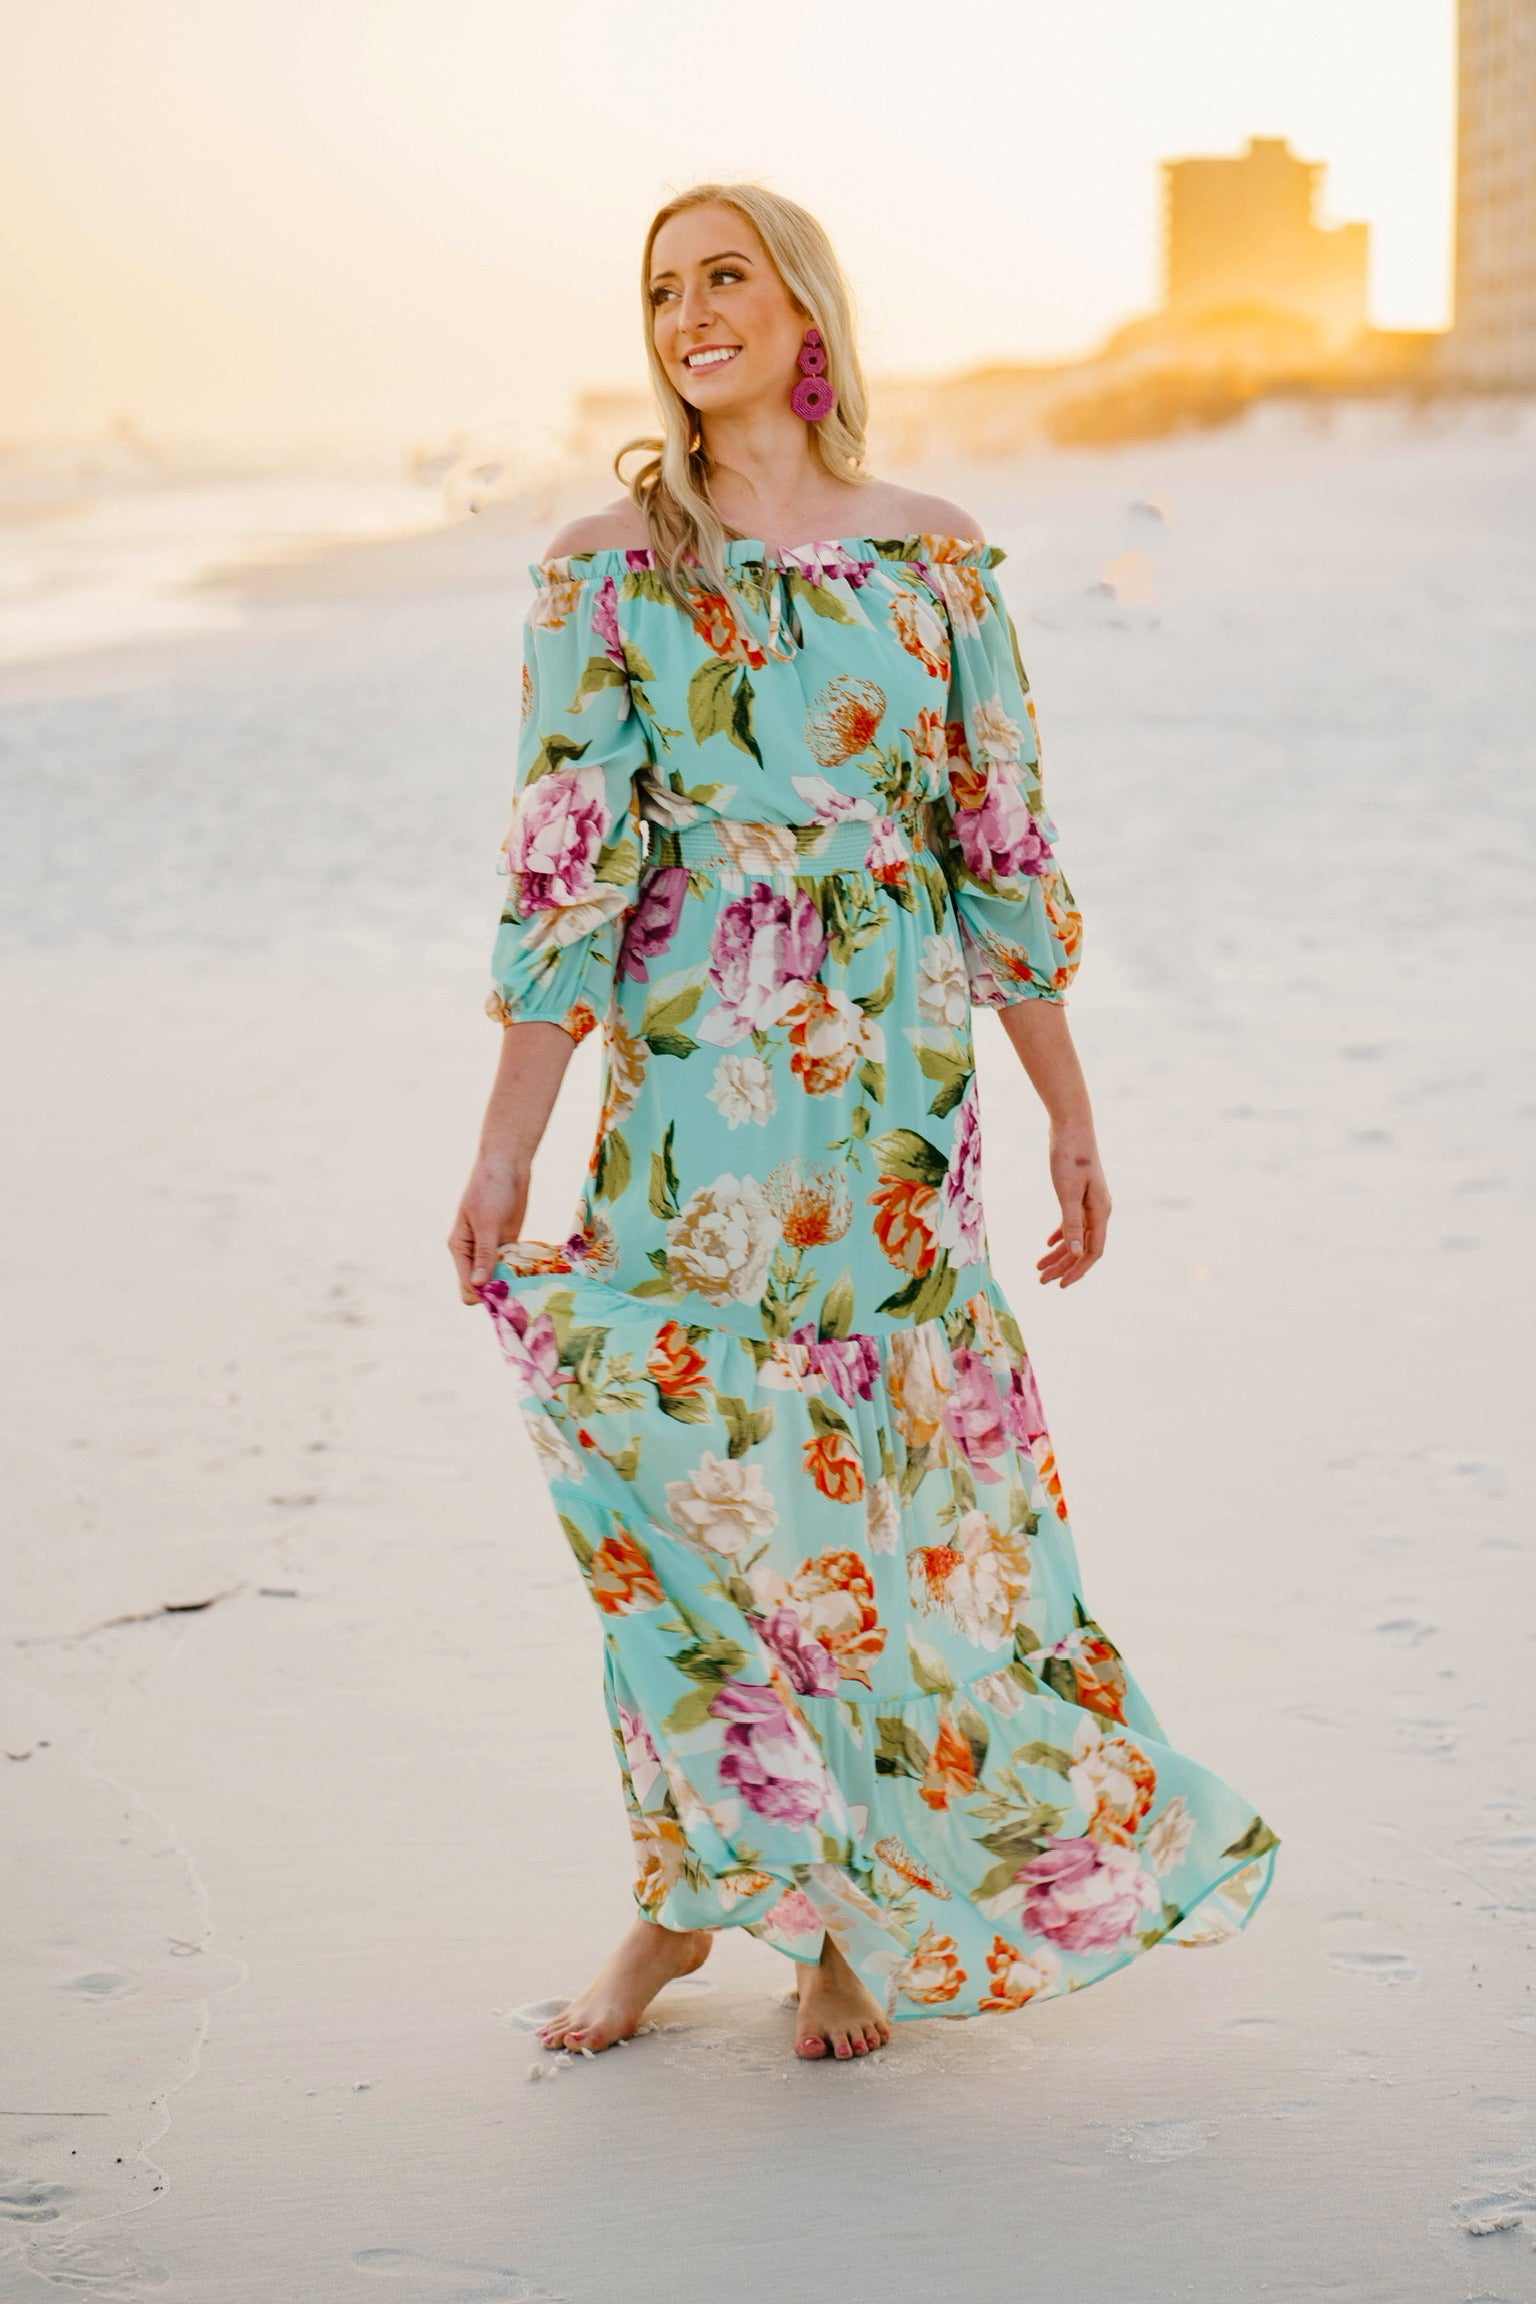 Last Chance Size Small & Medium | In Focus Light Off the Shoulder Floral Maxi Dress in Mint Green - Giddy Up Glamour Boutique